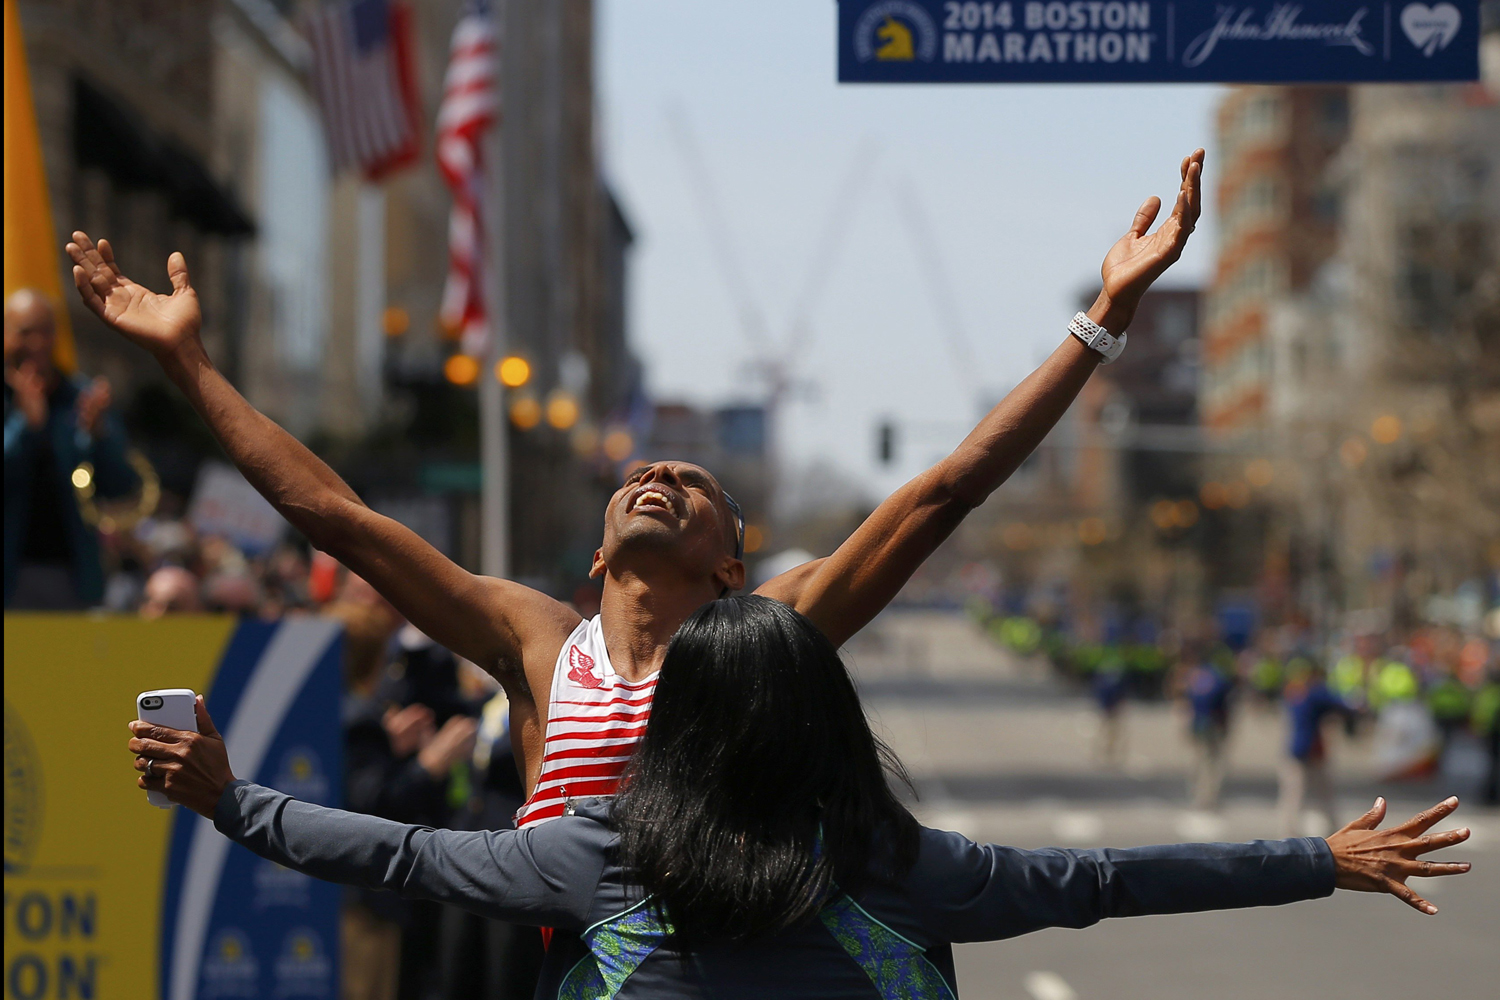 Meb Keflezighi of the U.S. celebrates with his wife Yordanos Asgedom after winning the men's division at the 118th running of the Boston Marathon